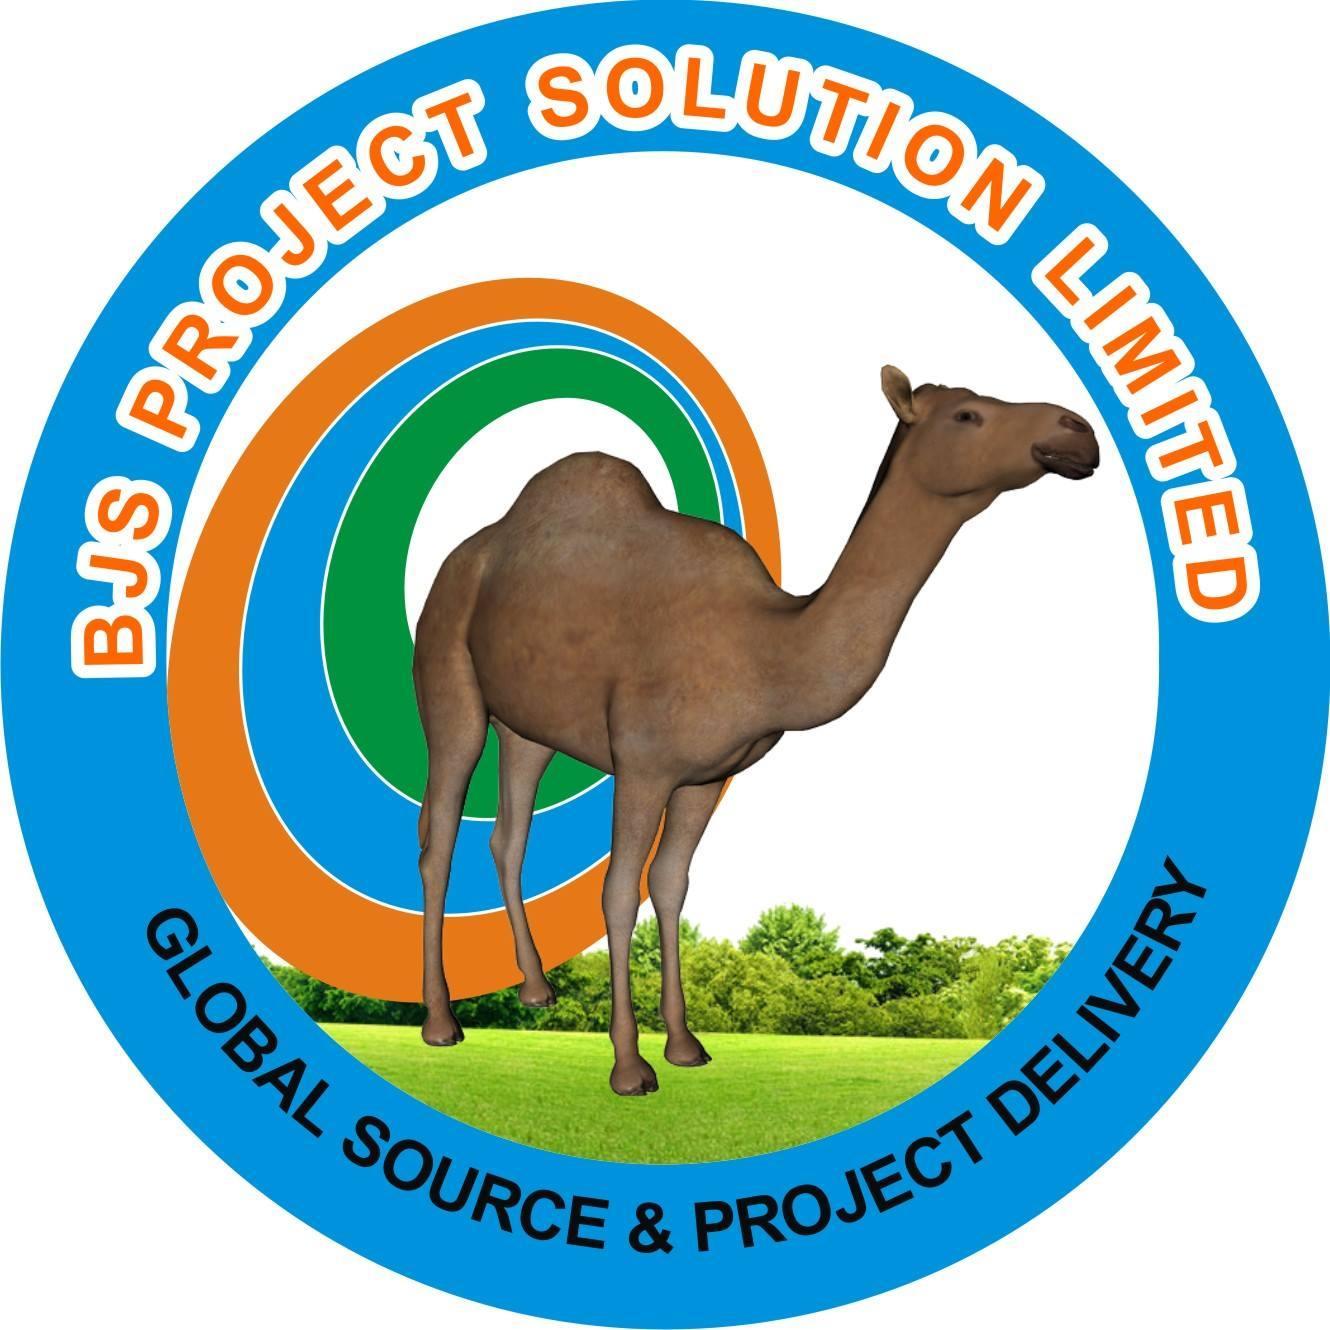 BJS Project Solution is an indigenous company based in Nigeria. The company has a medium staff size, with various operational and technical services